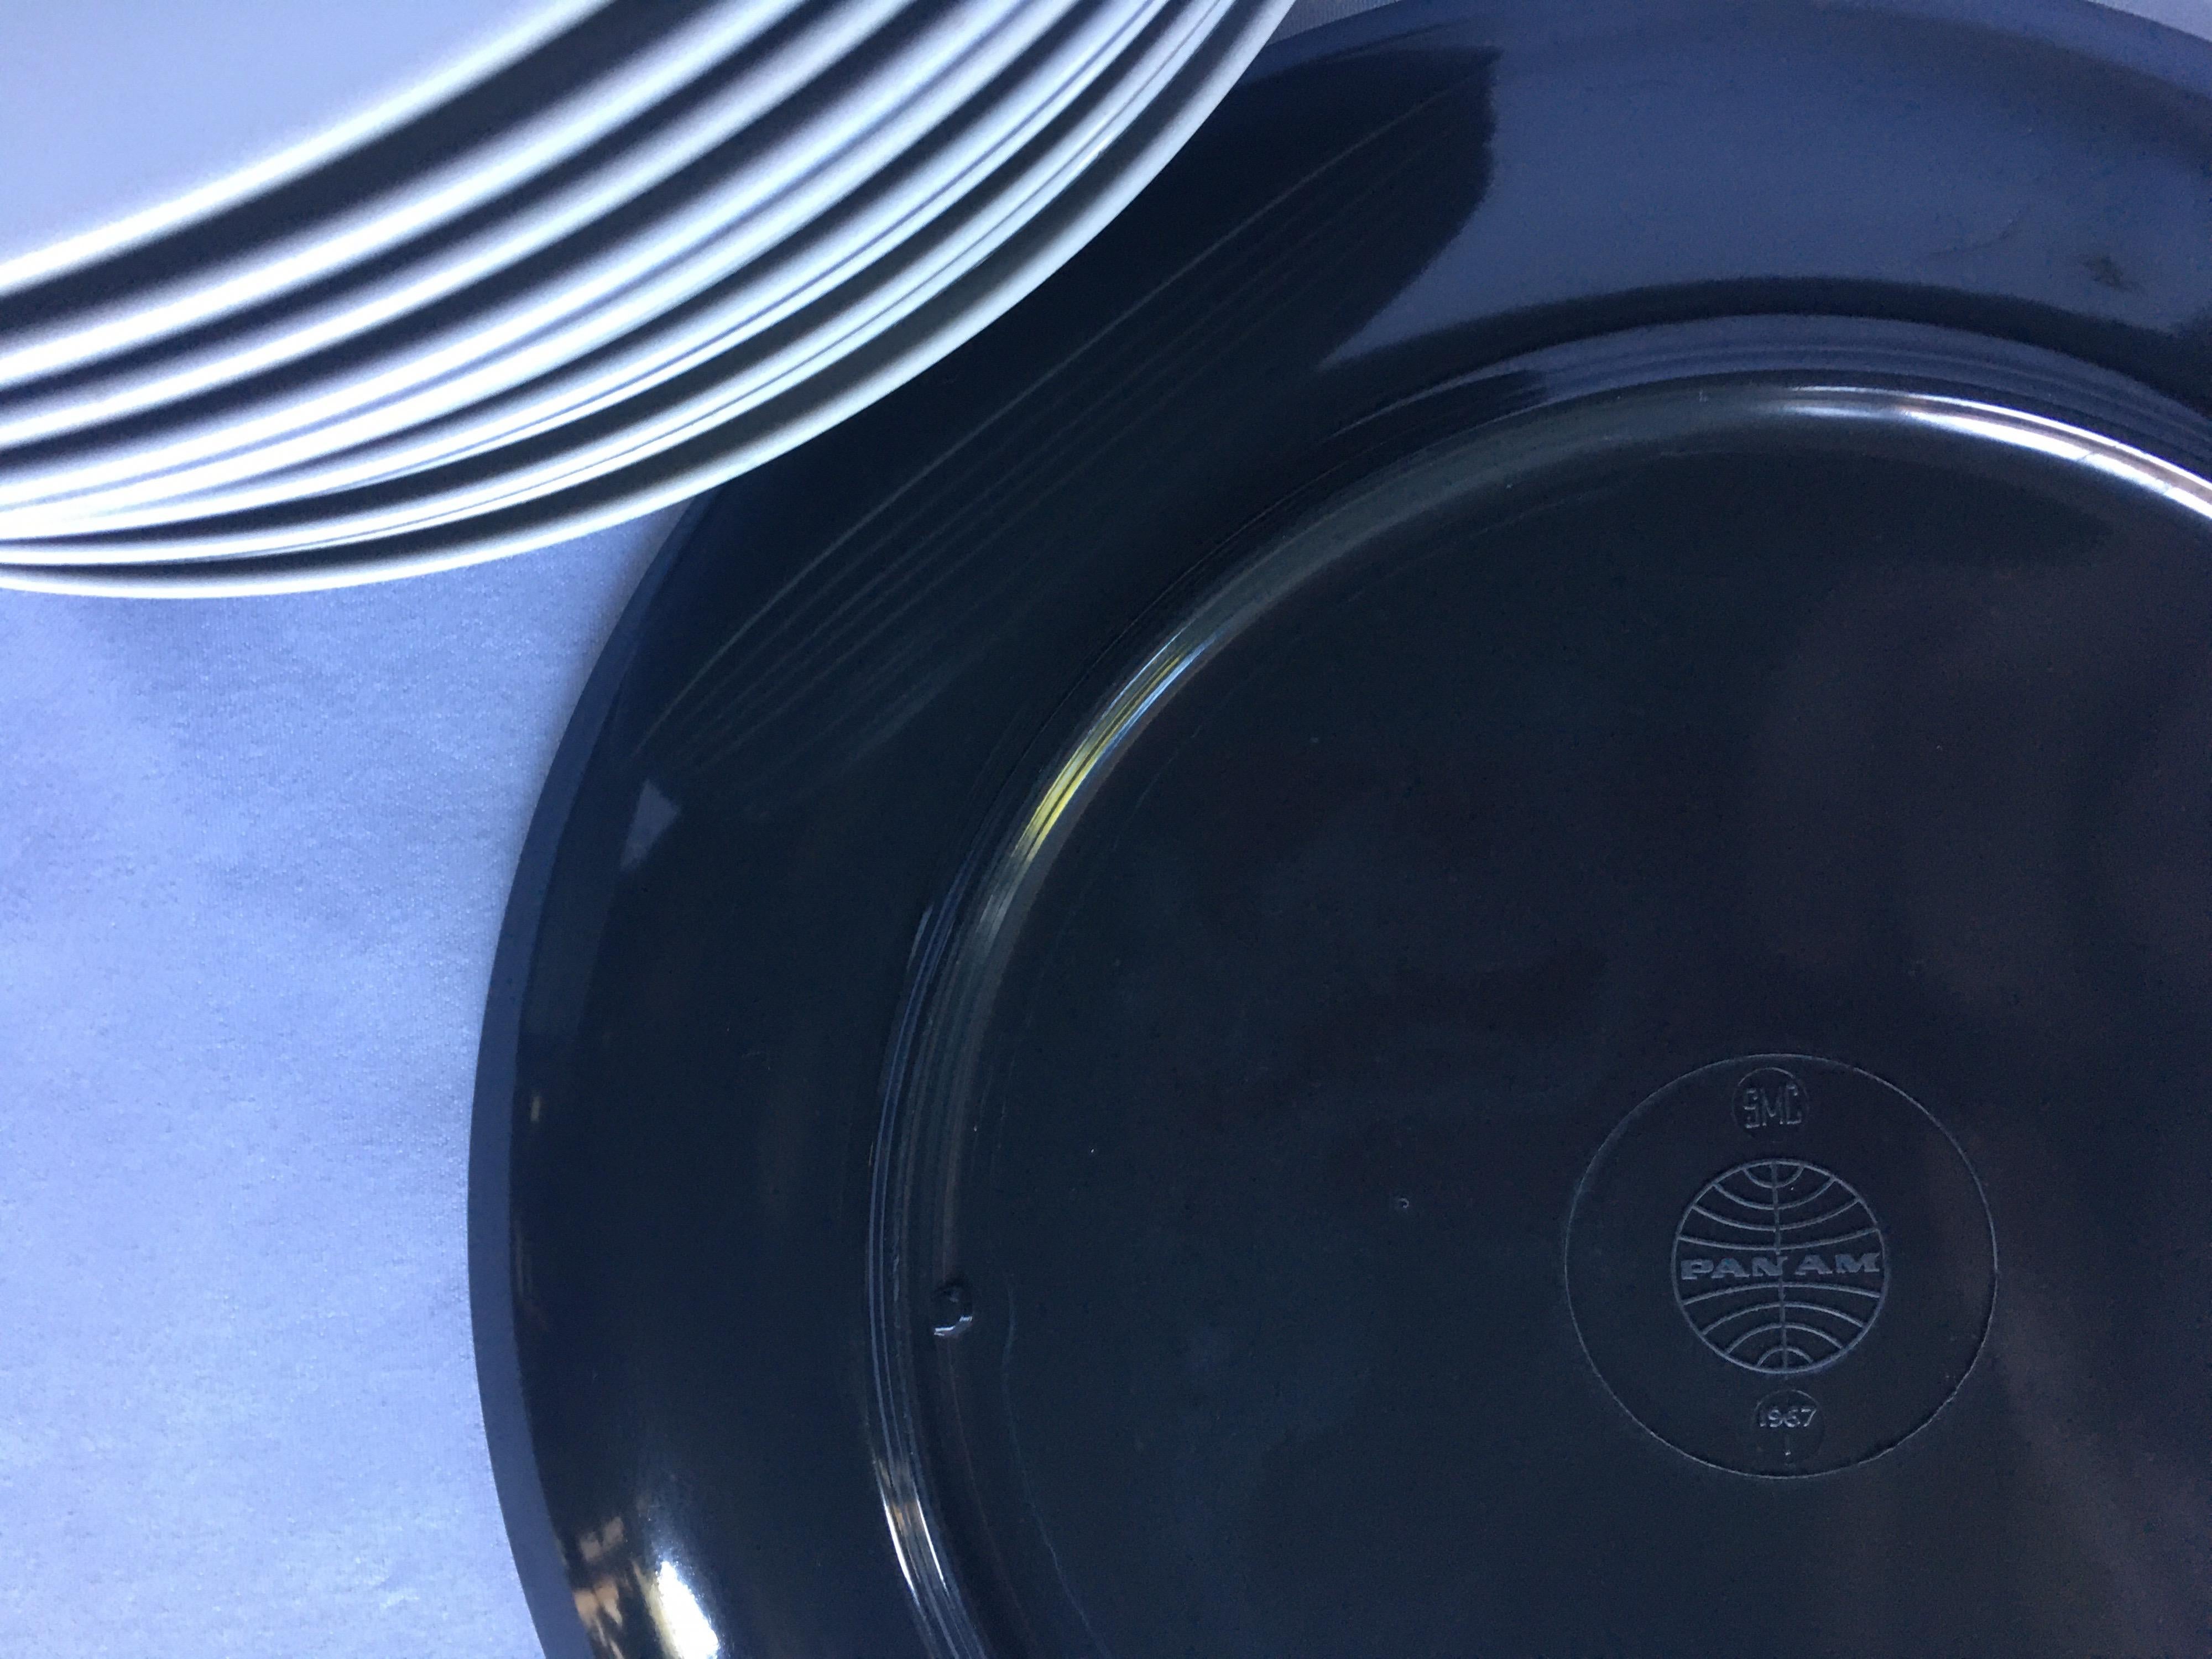 Mid-Century Modern Pan Am Airlines Melamine Plates Dinnerware Service, 1960s For Sale 5